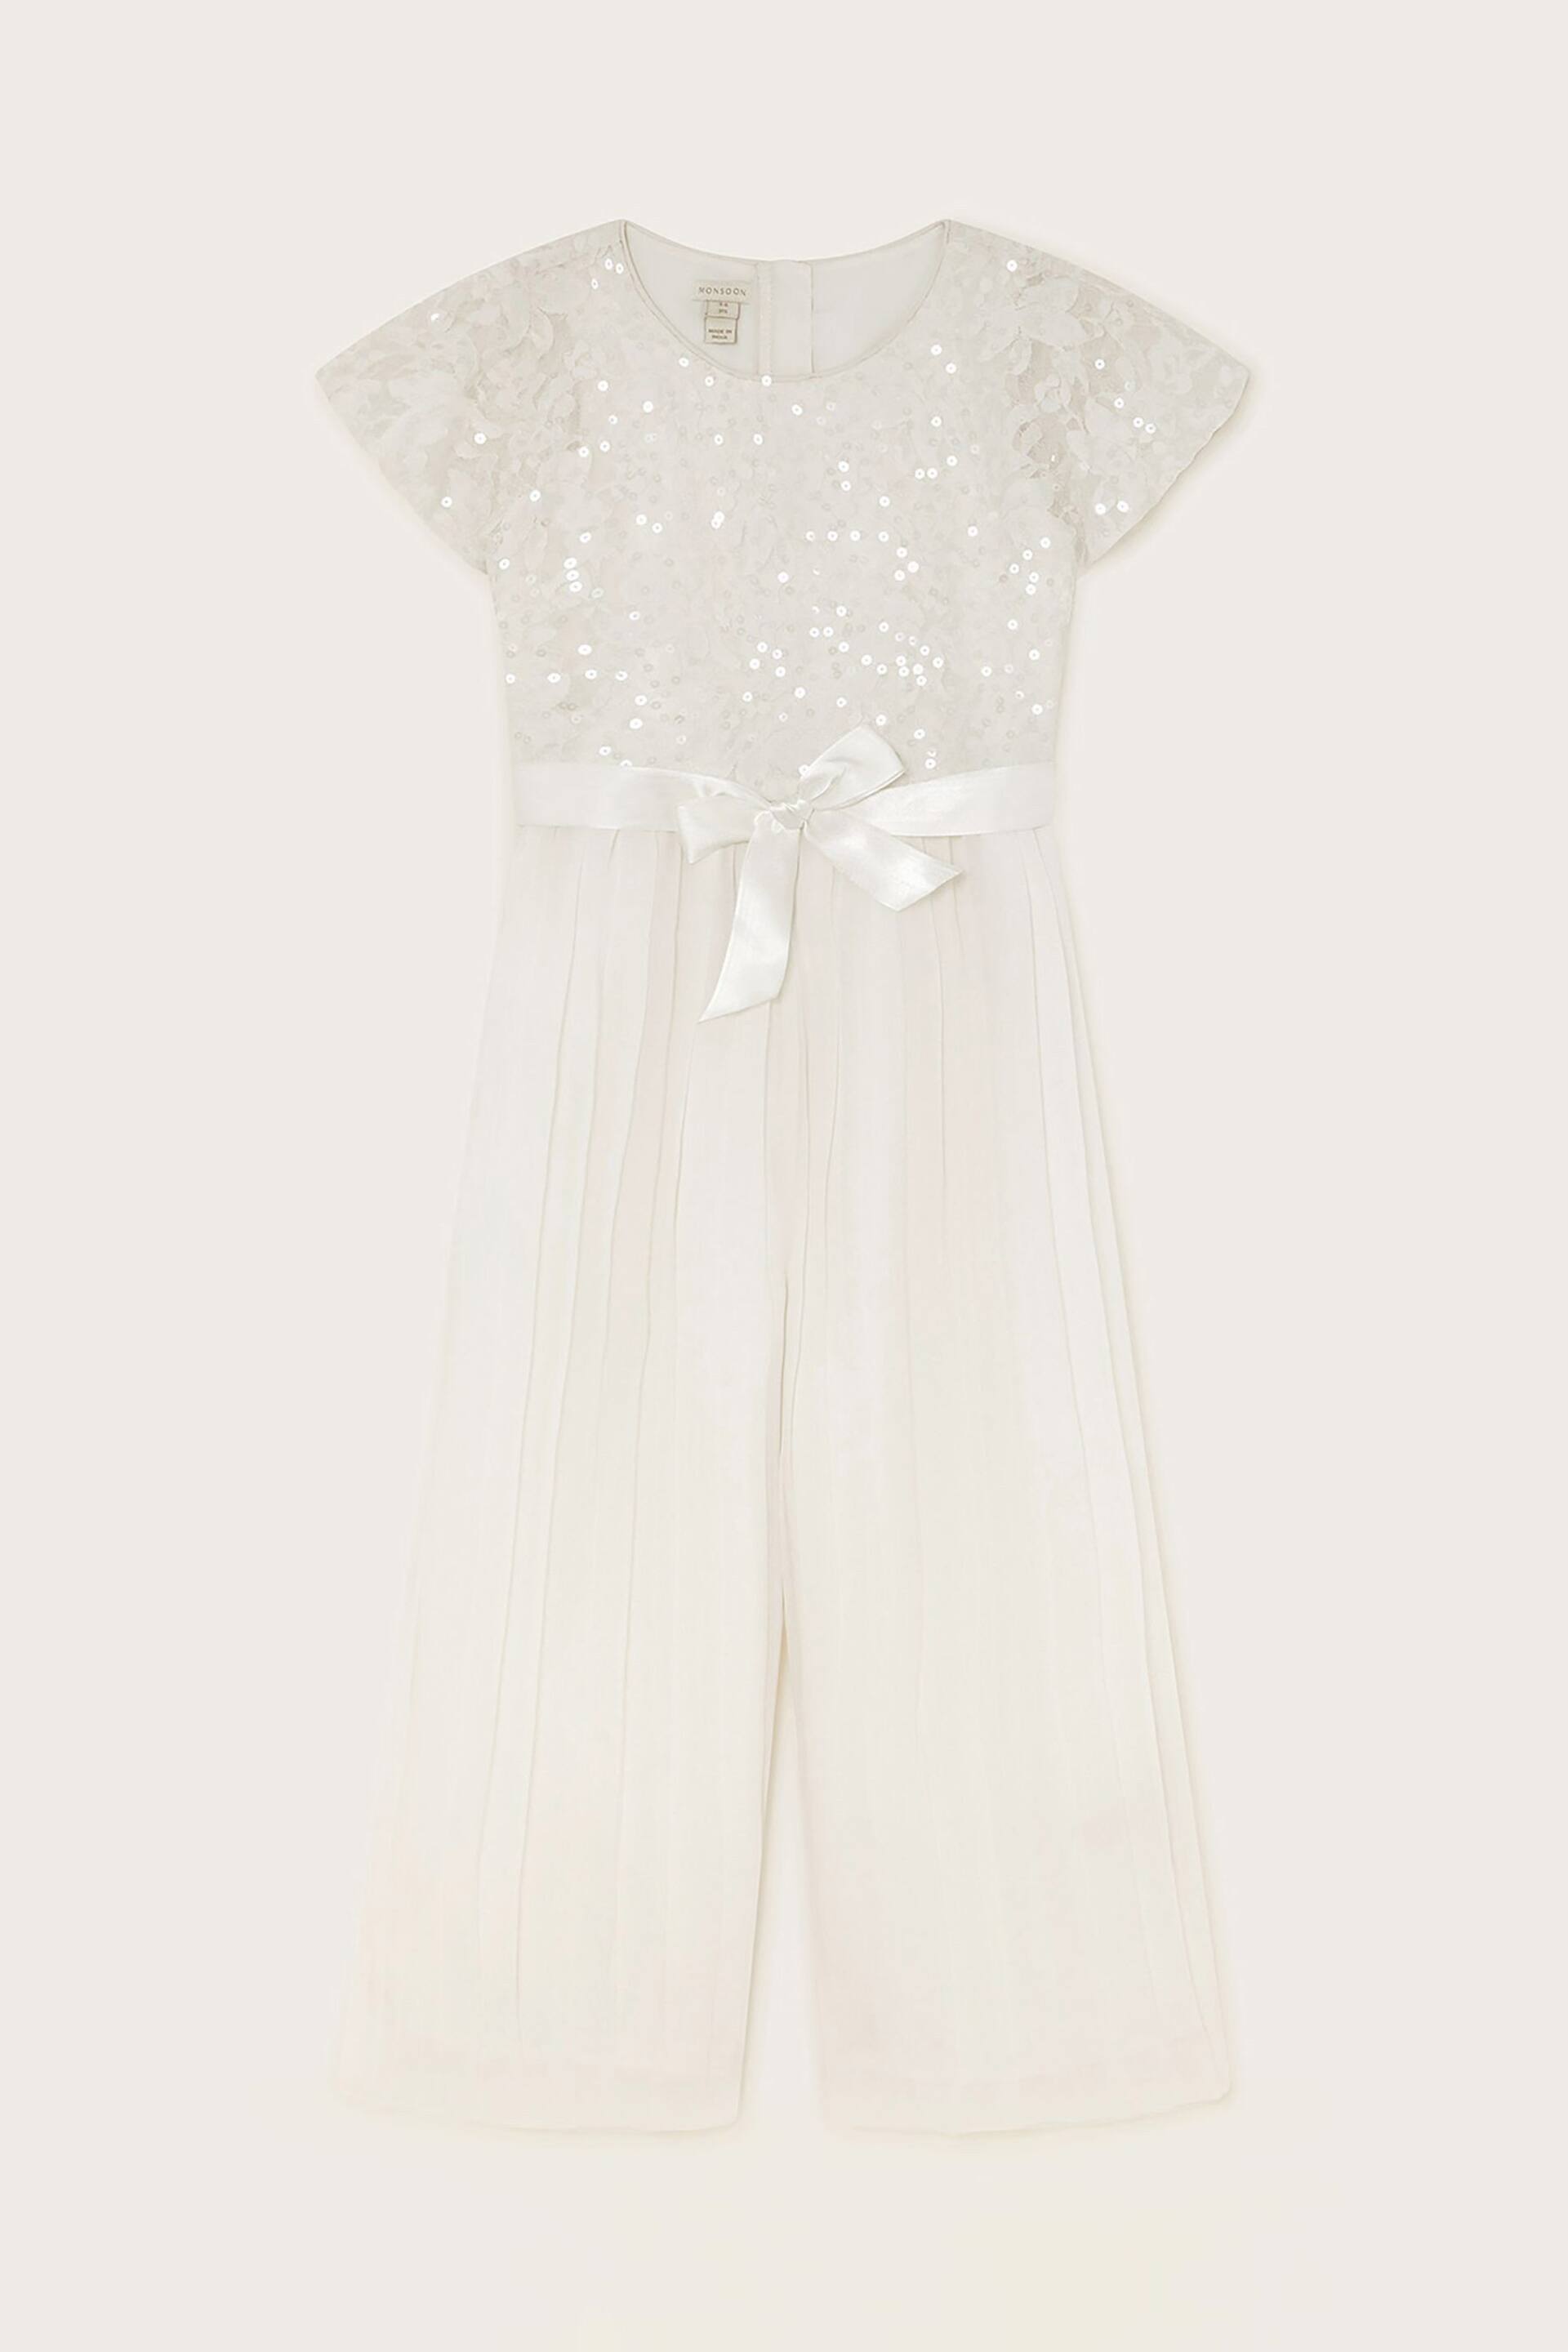 Monsoon White Sequin Lacey Cape Jumpsuit - Image 1 of 3